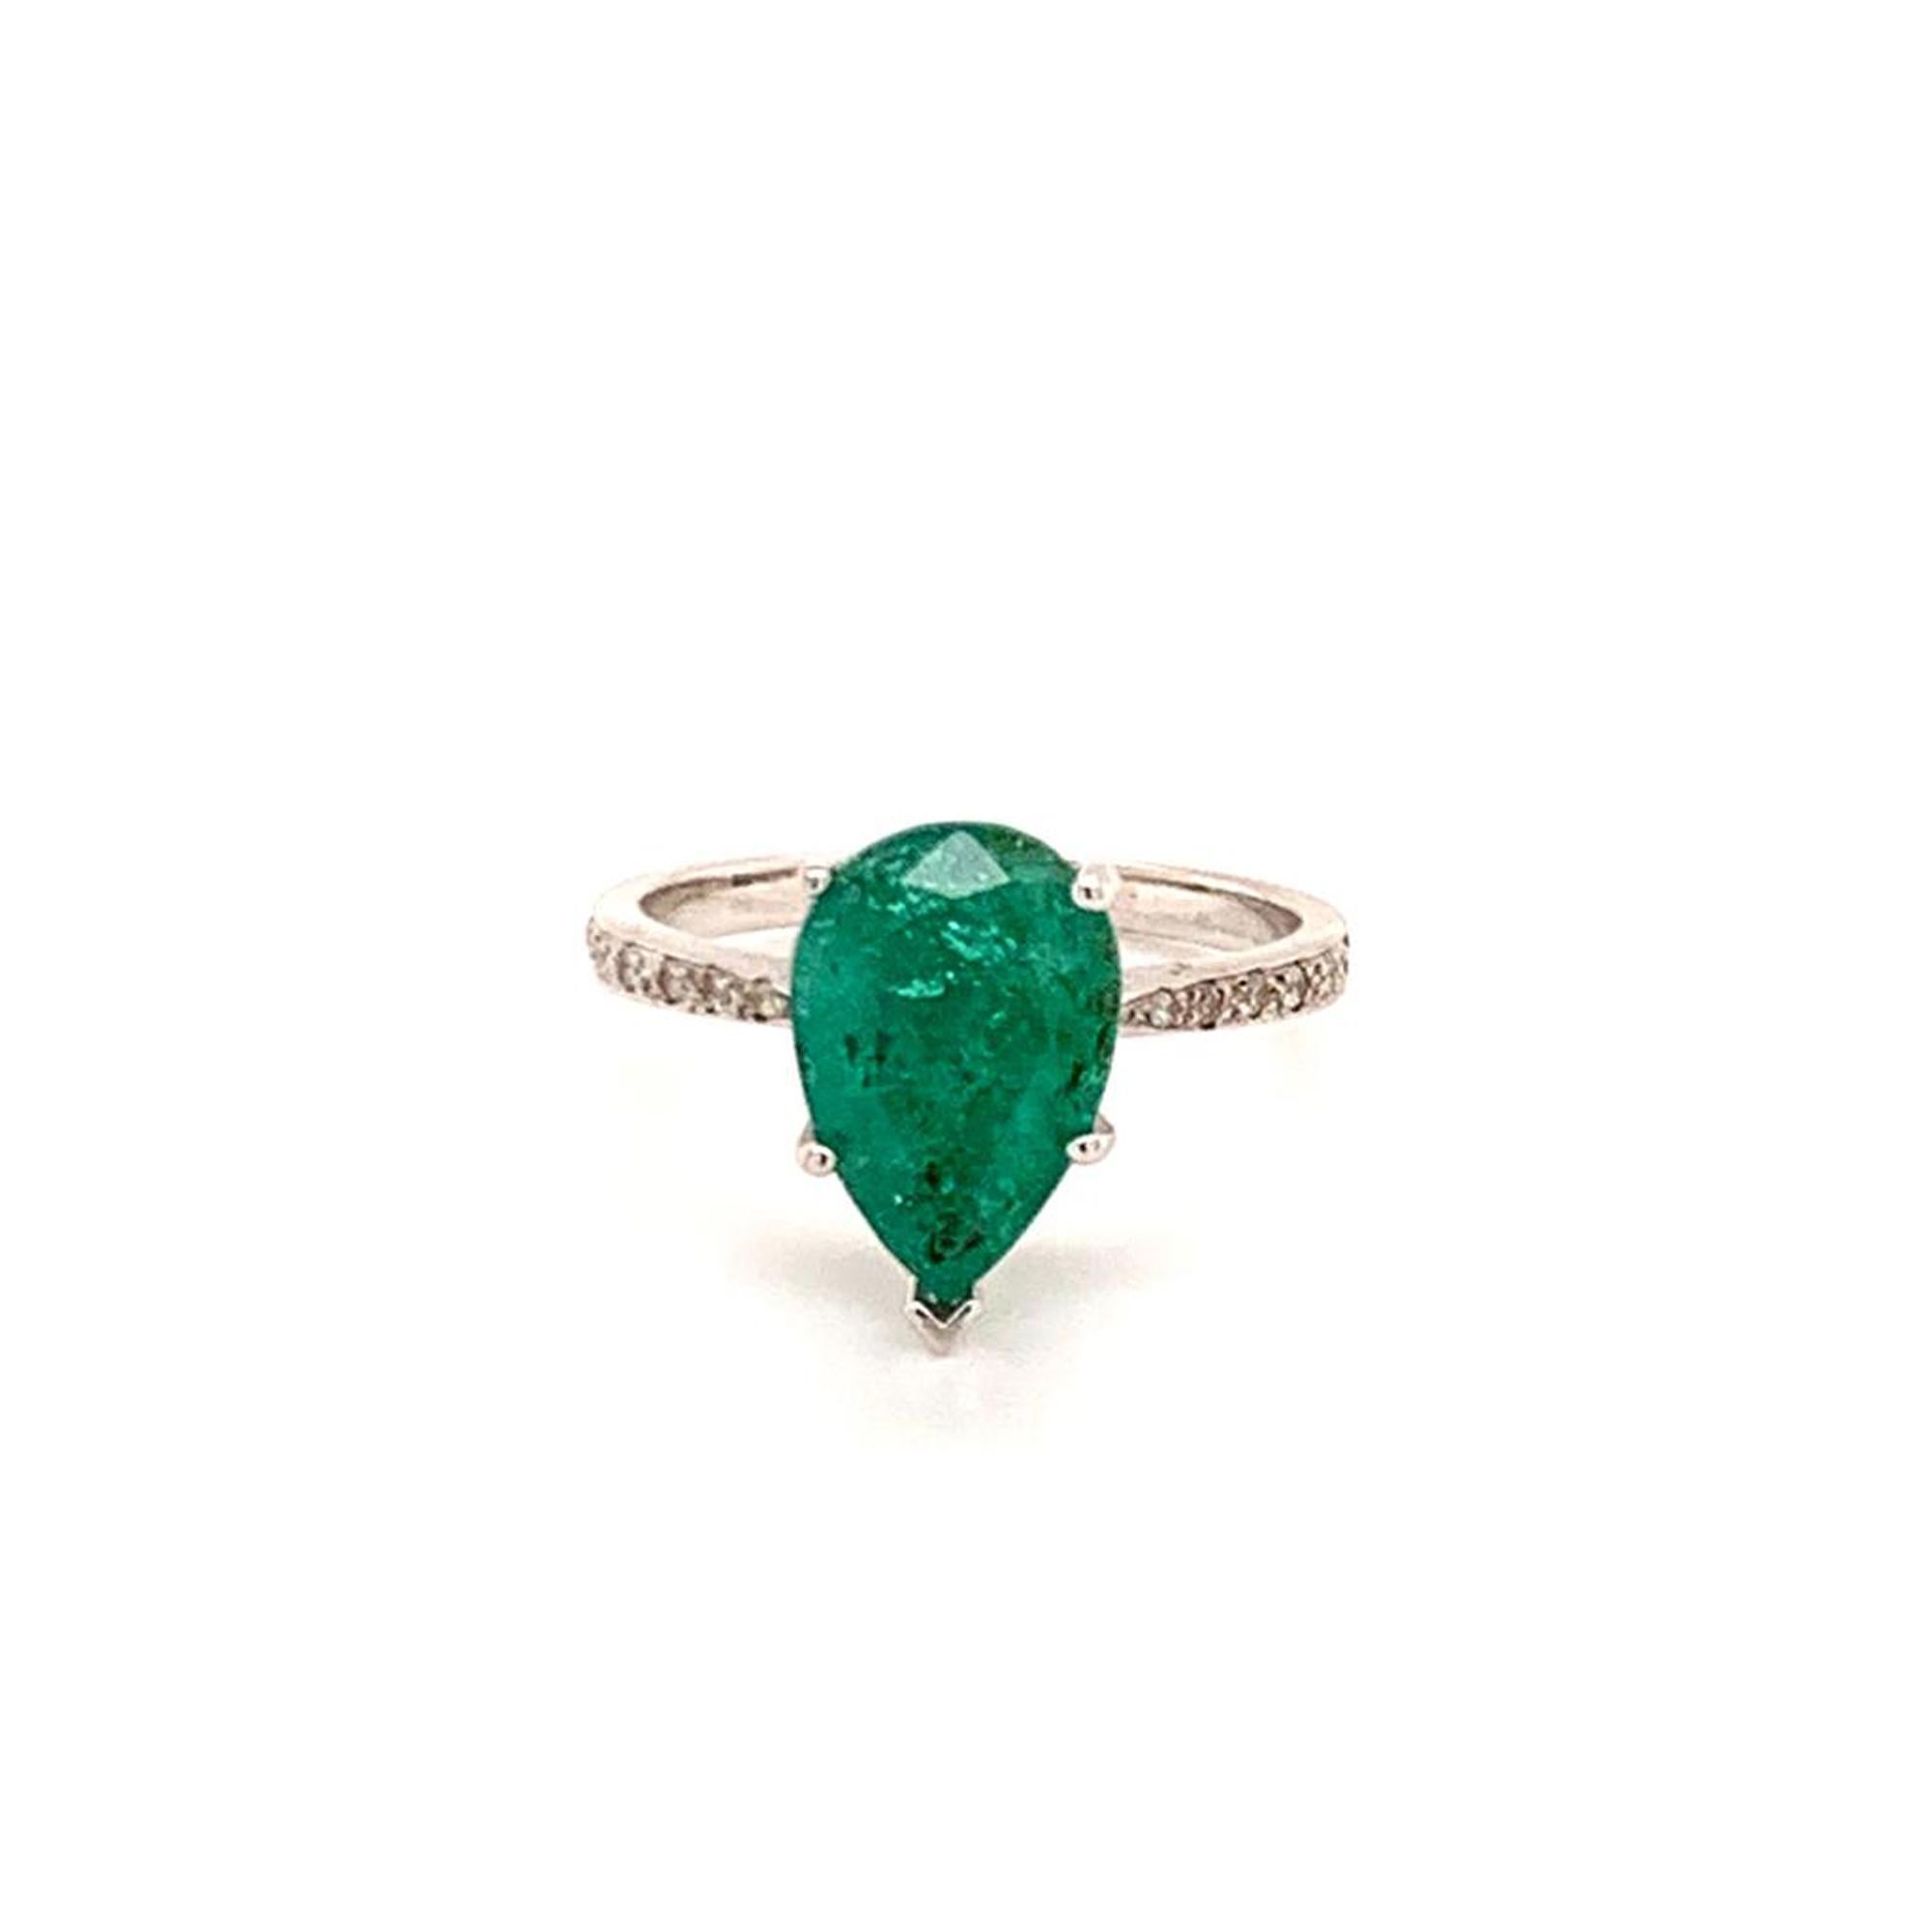 CERTIFIED $4,550
LADIES FINE QUALITY EMERALD AND DIAMOND 14 KT RING  LARGE 3.59 TCW

This ring was Certified and appraised in the amount of $4,550 by the prestigious
This is a One of a Kind Unique Custom Made Glamorous Piece of Jewelry!!

Nothing